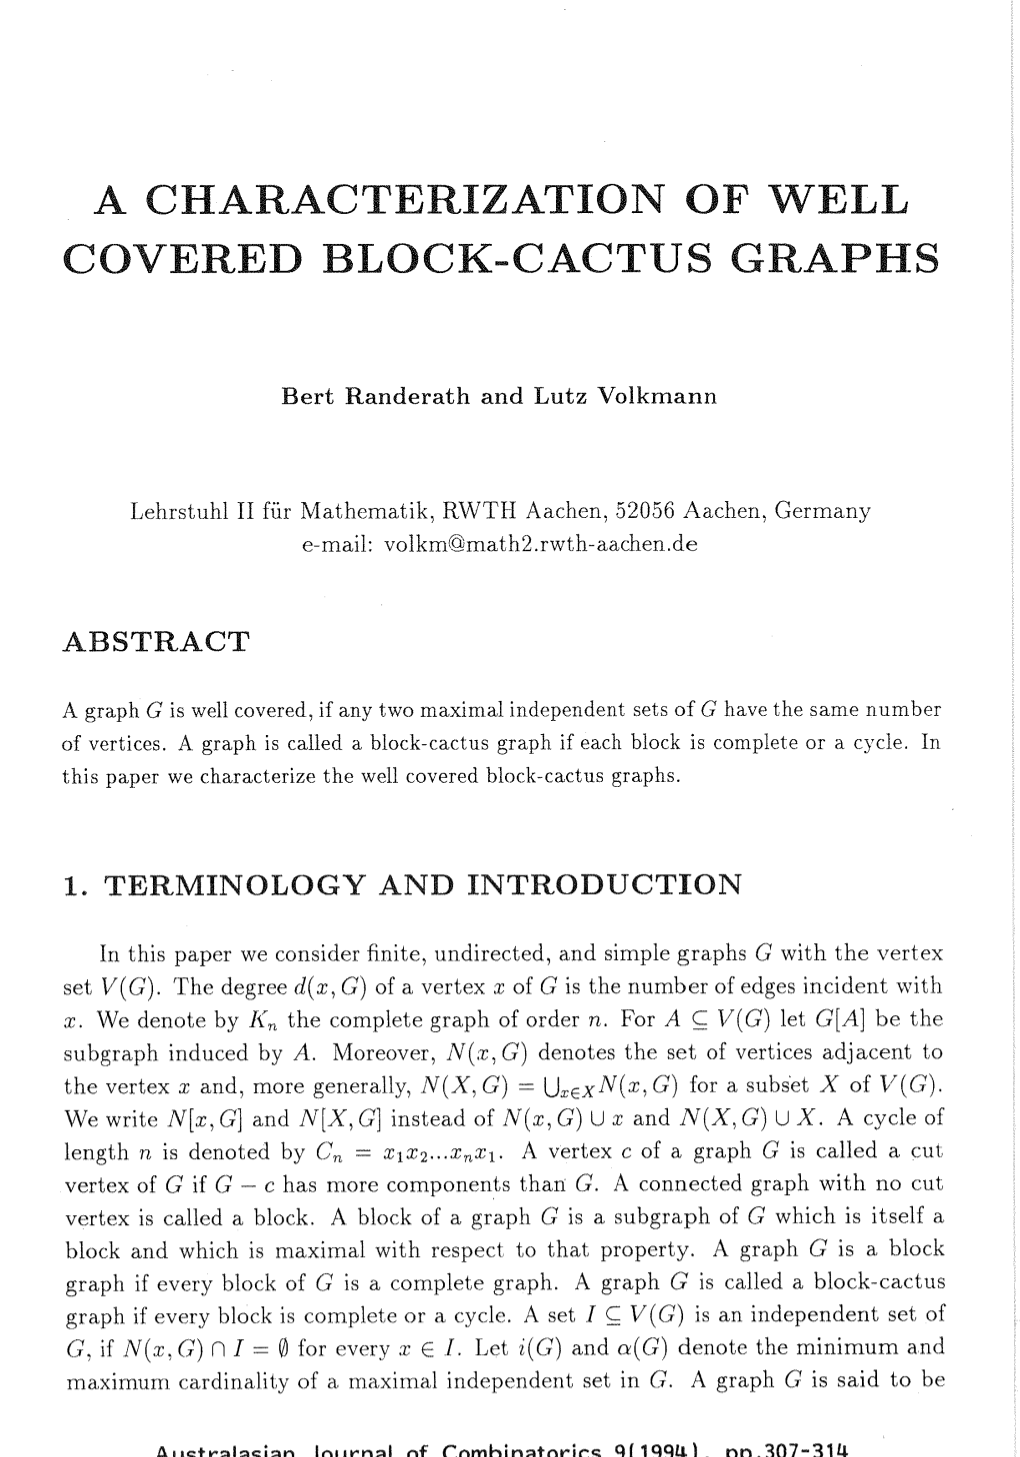 A Characterization of Well Covered Block-Cactus Graphs